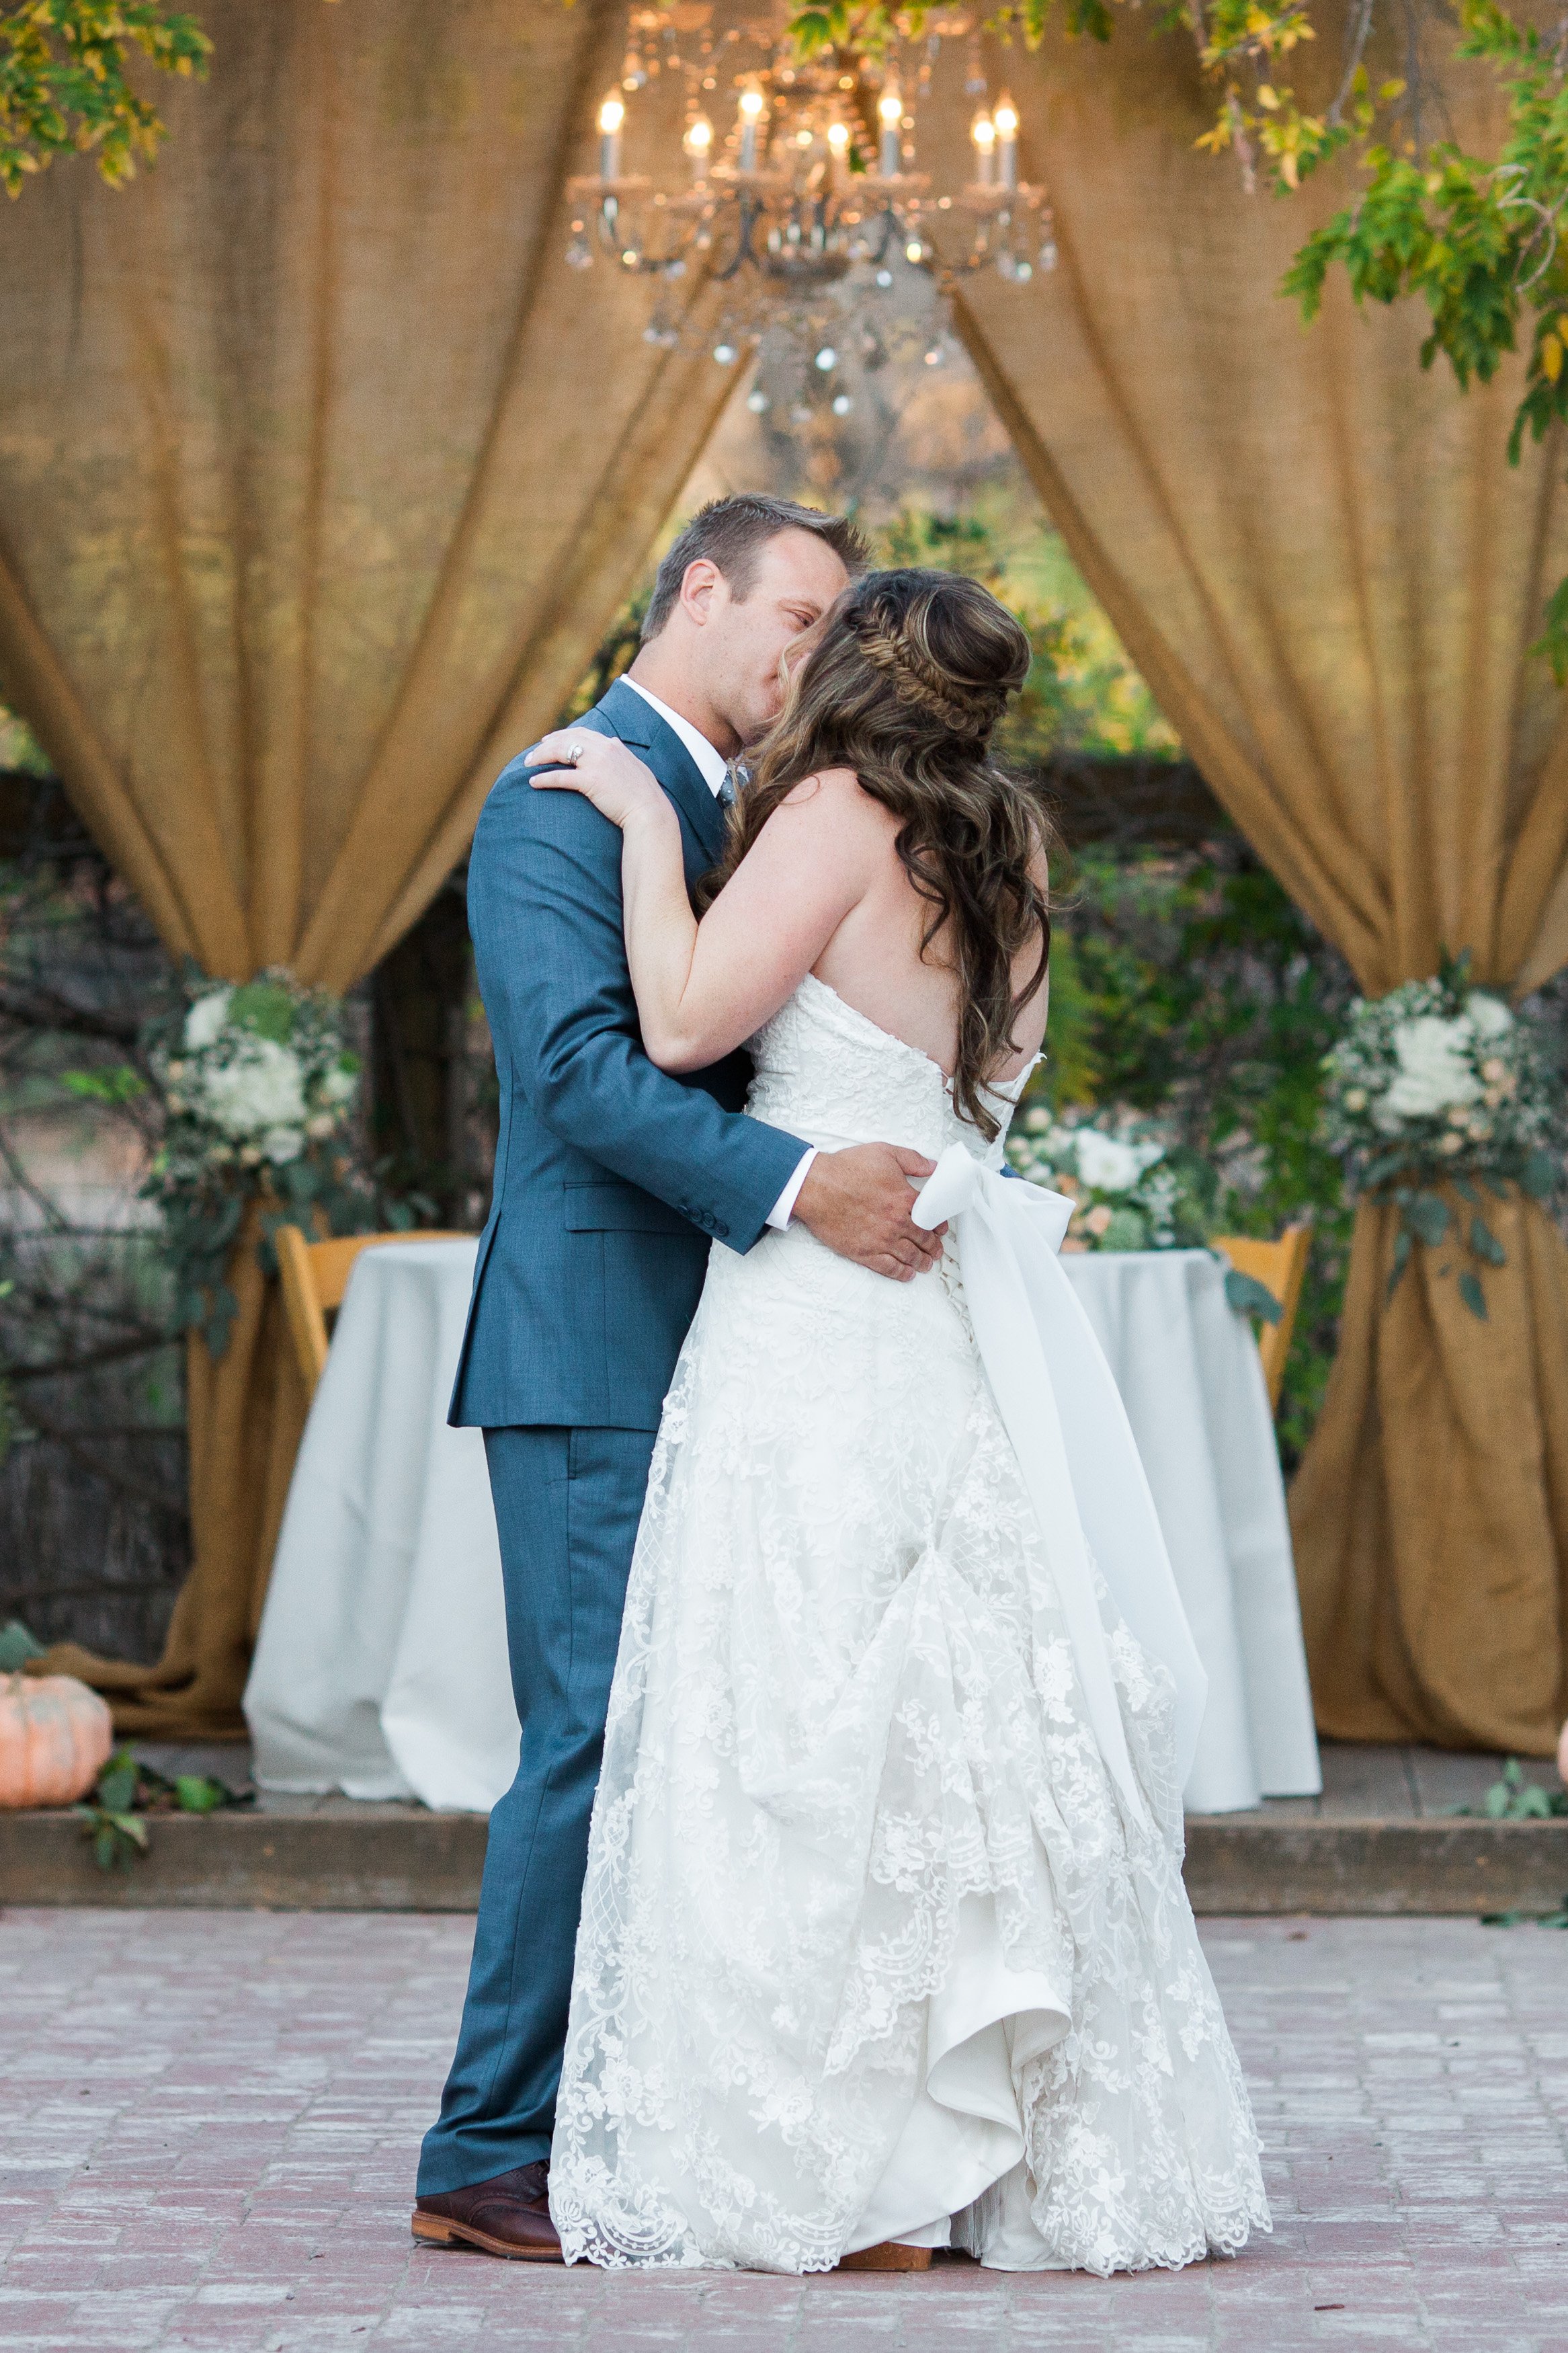 www.santabarbarawedding.com | The Gardens at Peacock Farms | Jennifer Lourie | Bride and Groom | First Dance